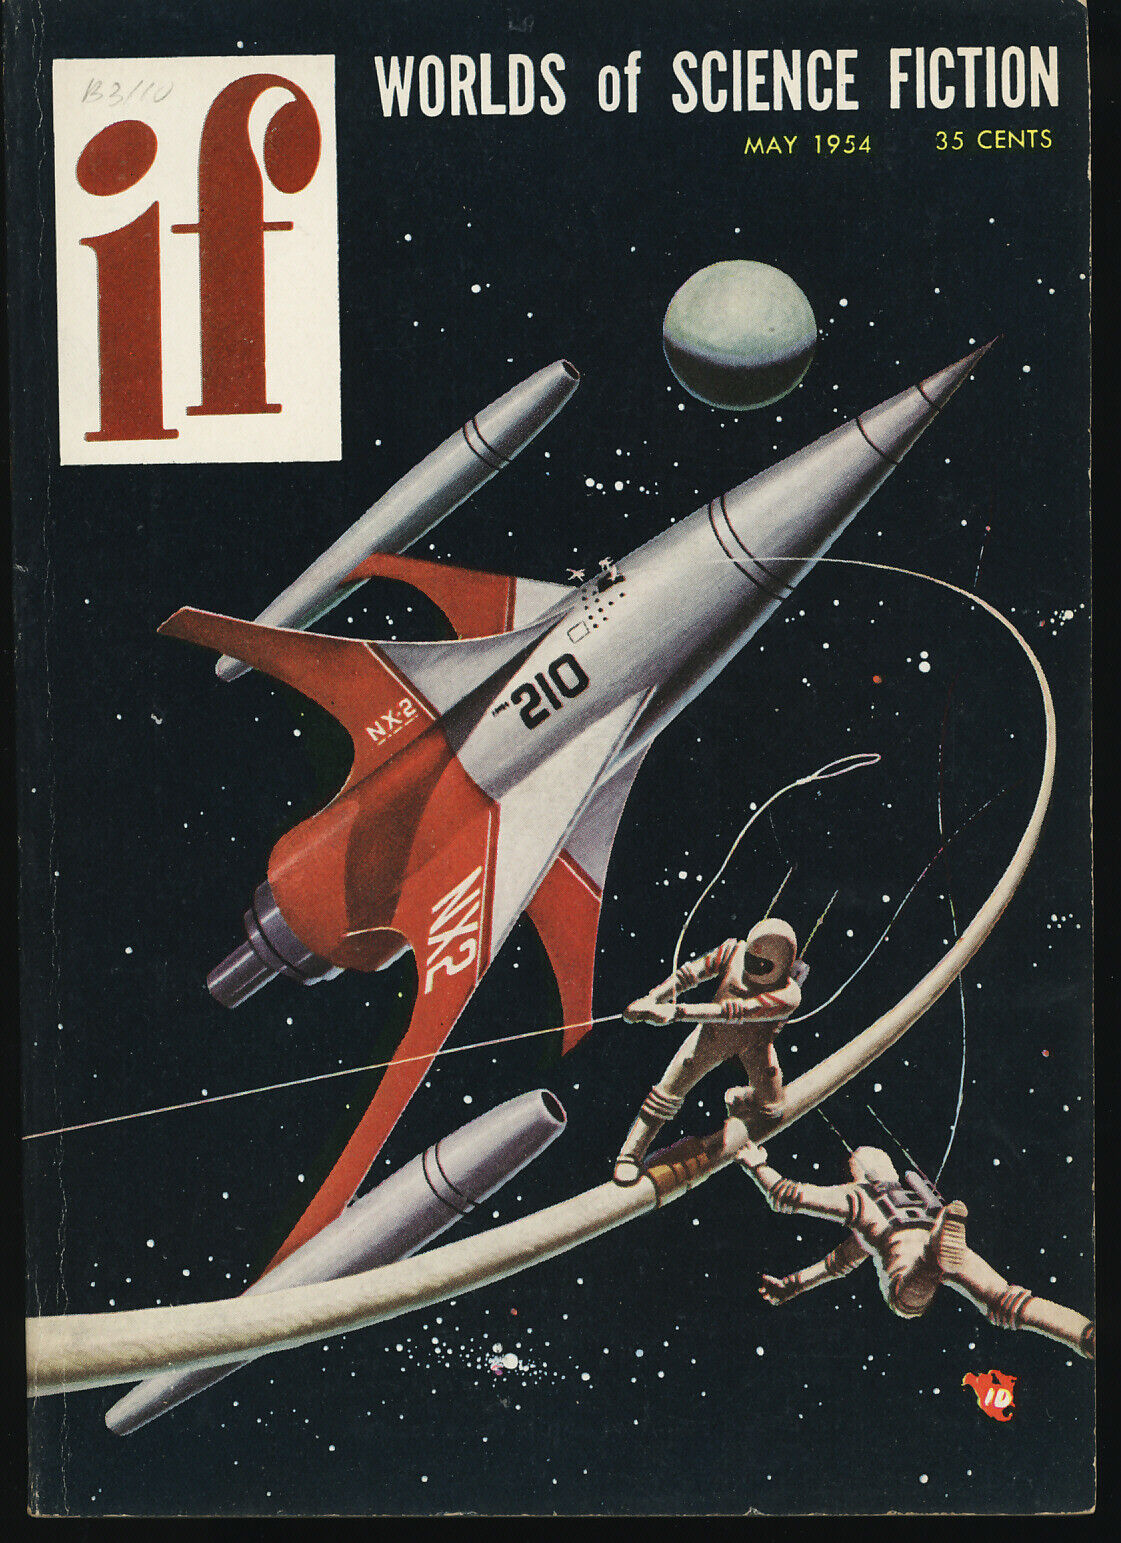 IF WORLDS OF SCIENCE FICTION May 1954 Prominent Author by Philip K Dick.